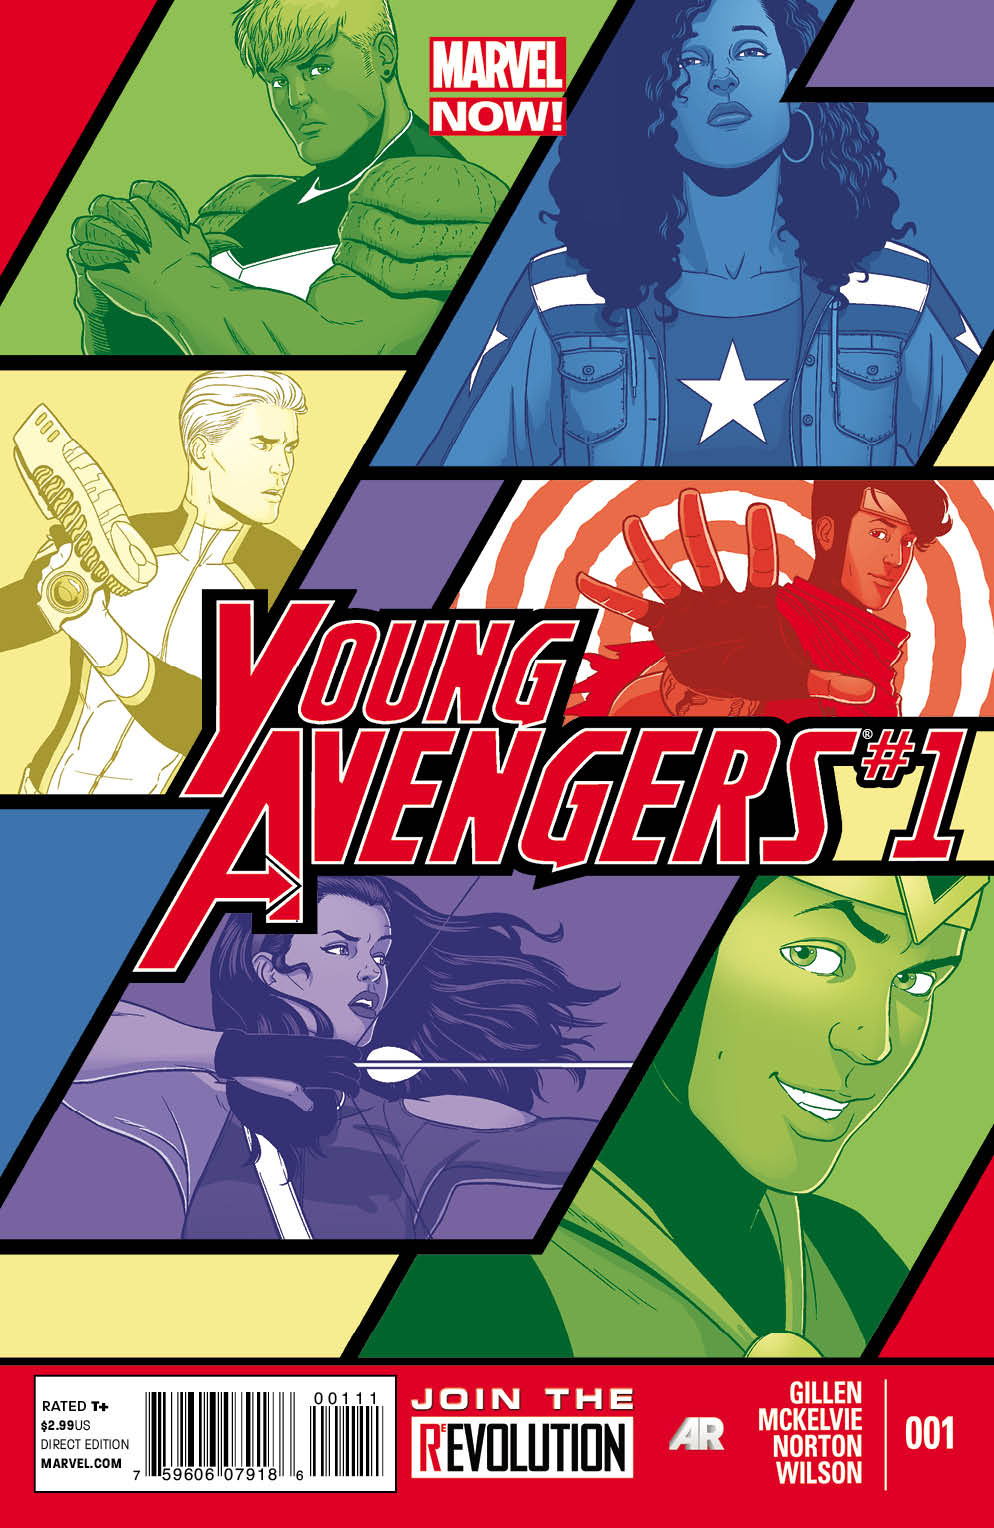 The Future of YOUNG AVENGERS Is Marvel NOW!